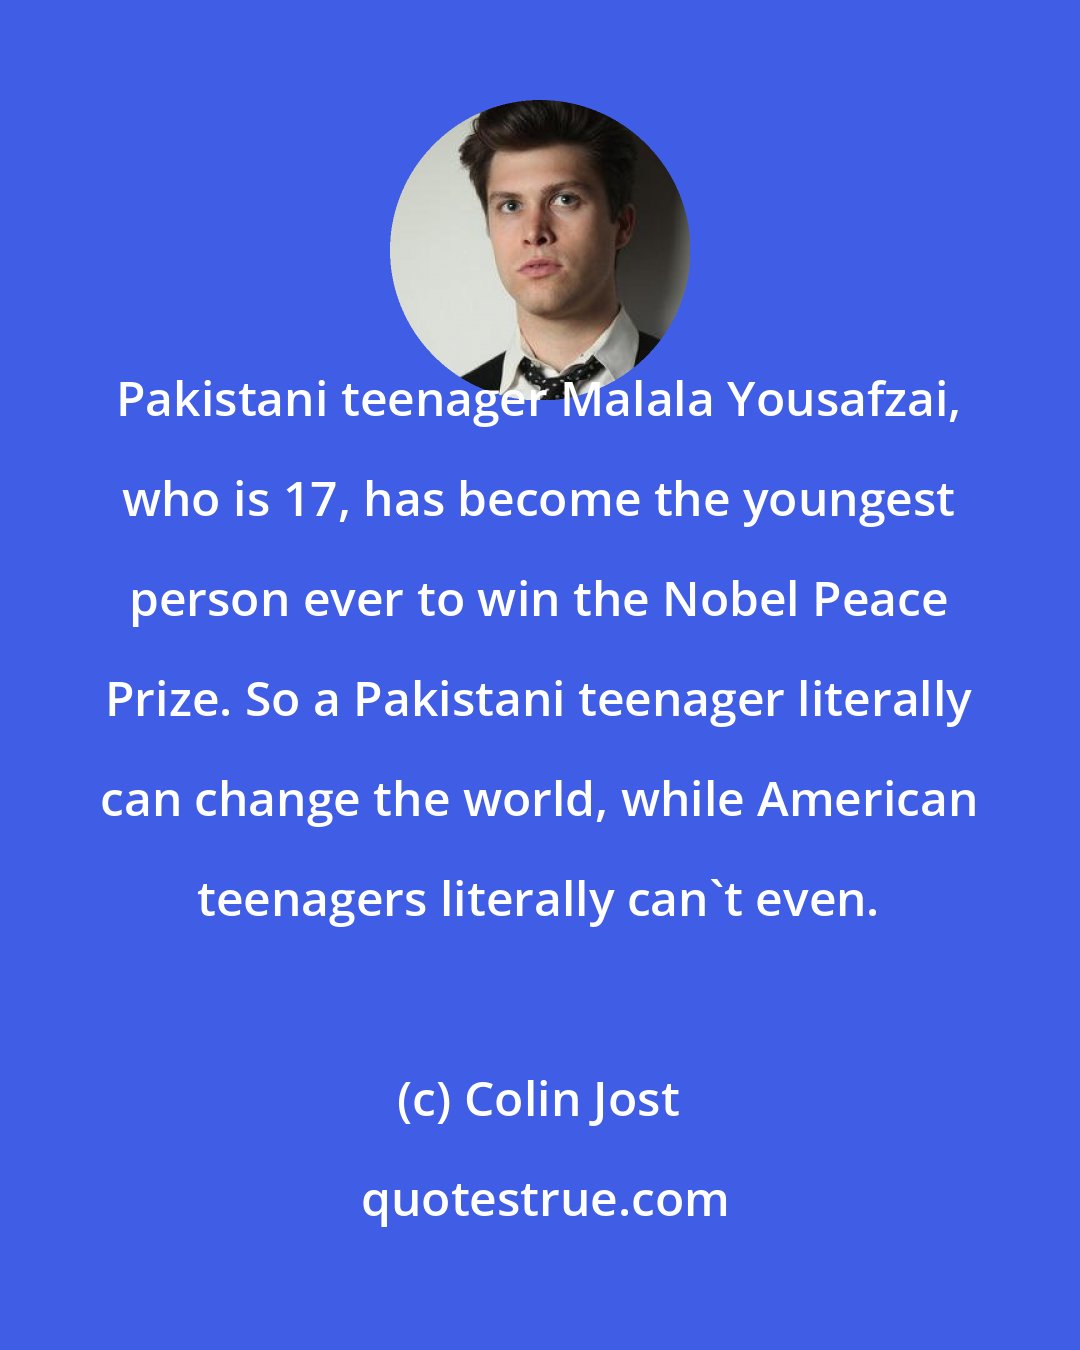 Colin Jost: Pakistani teenager Malala Yousafzai, who is 17, has become the youngest person ever to win the Nobel Peace Prize. So a Pakistani teenager literally can change the world, while American teenagers literally can't even.